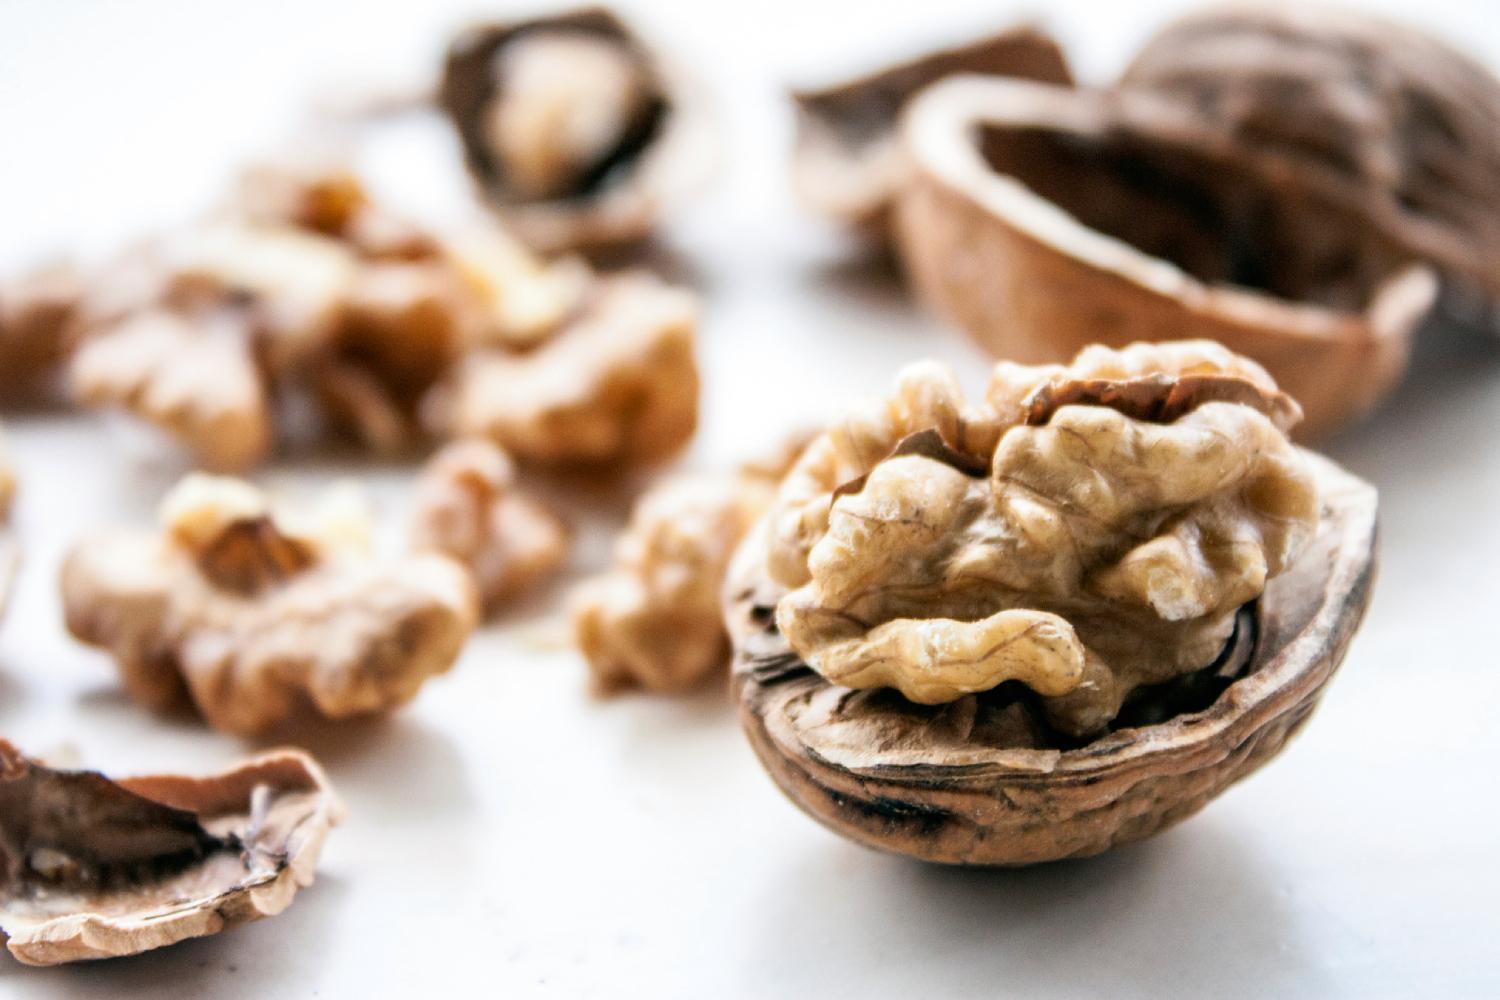 Walnuts may be a source of antioxidants, but they were also a major source of frustration for a North Dakota man.